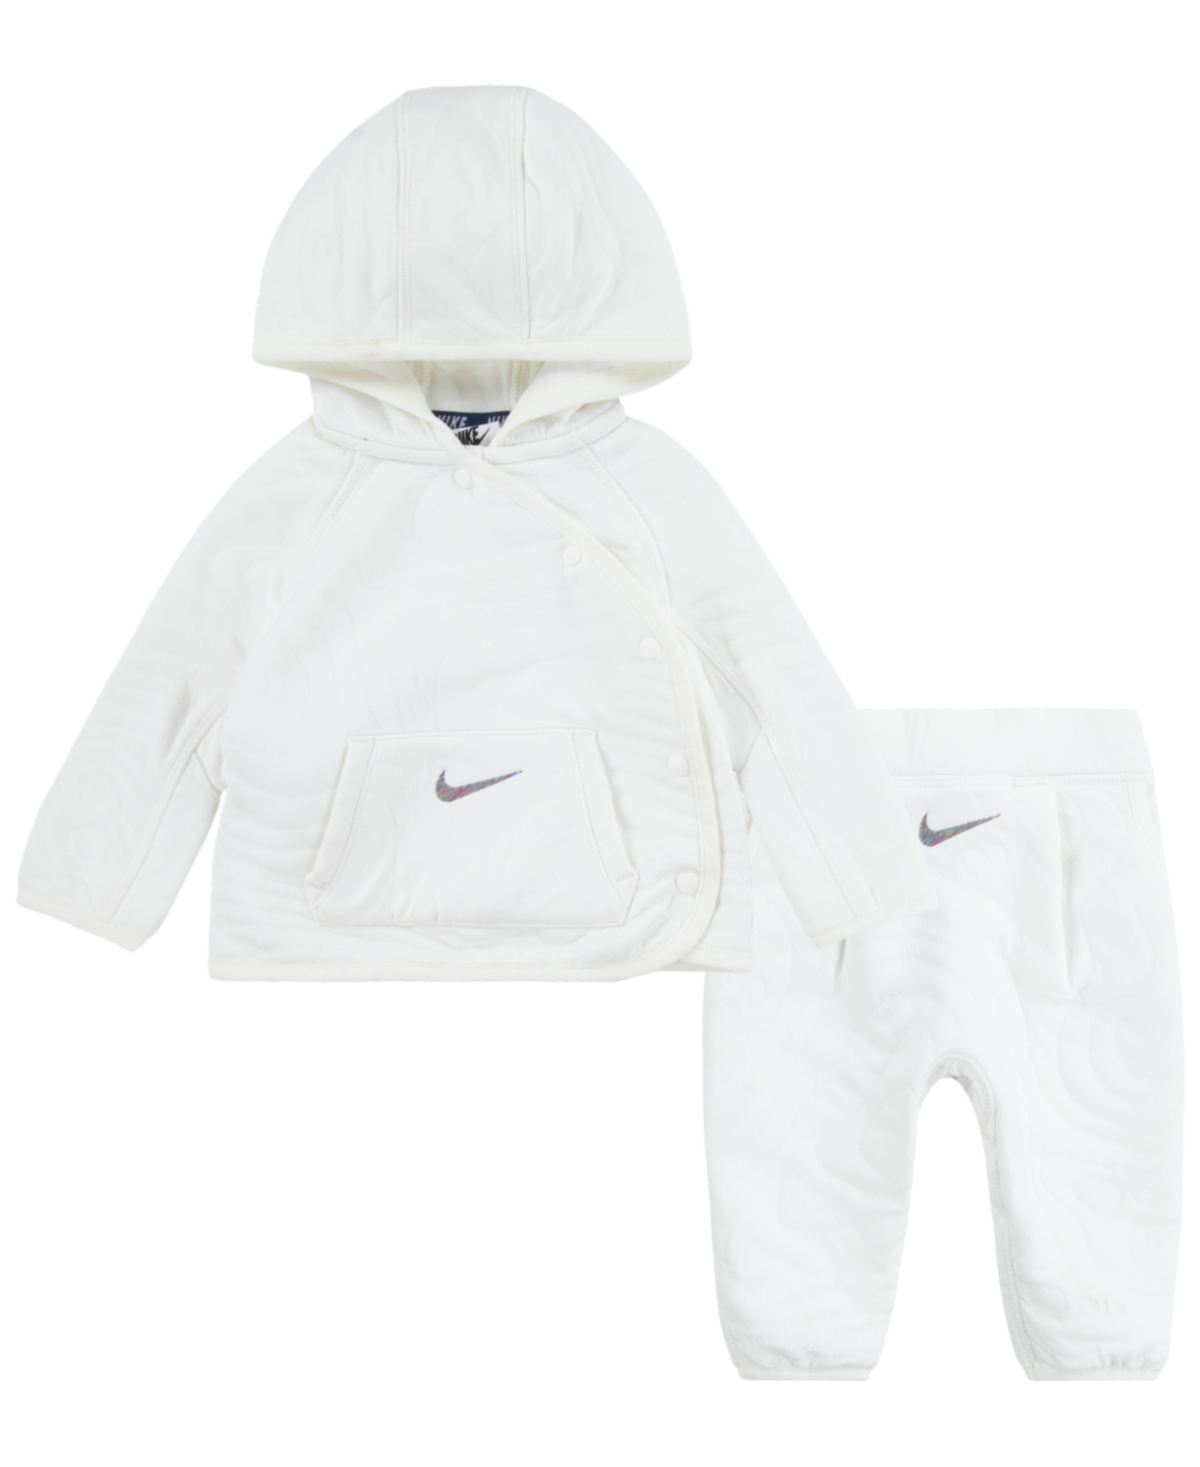 Nike Baby Boys Or Girls Ready, Snap Jacket And Pants, 2 Piece Set In Sail